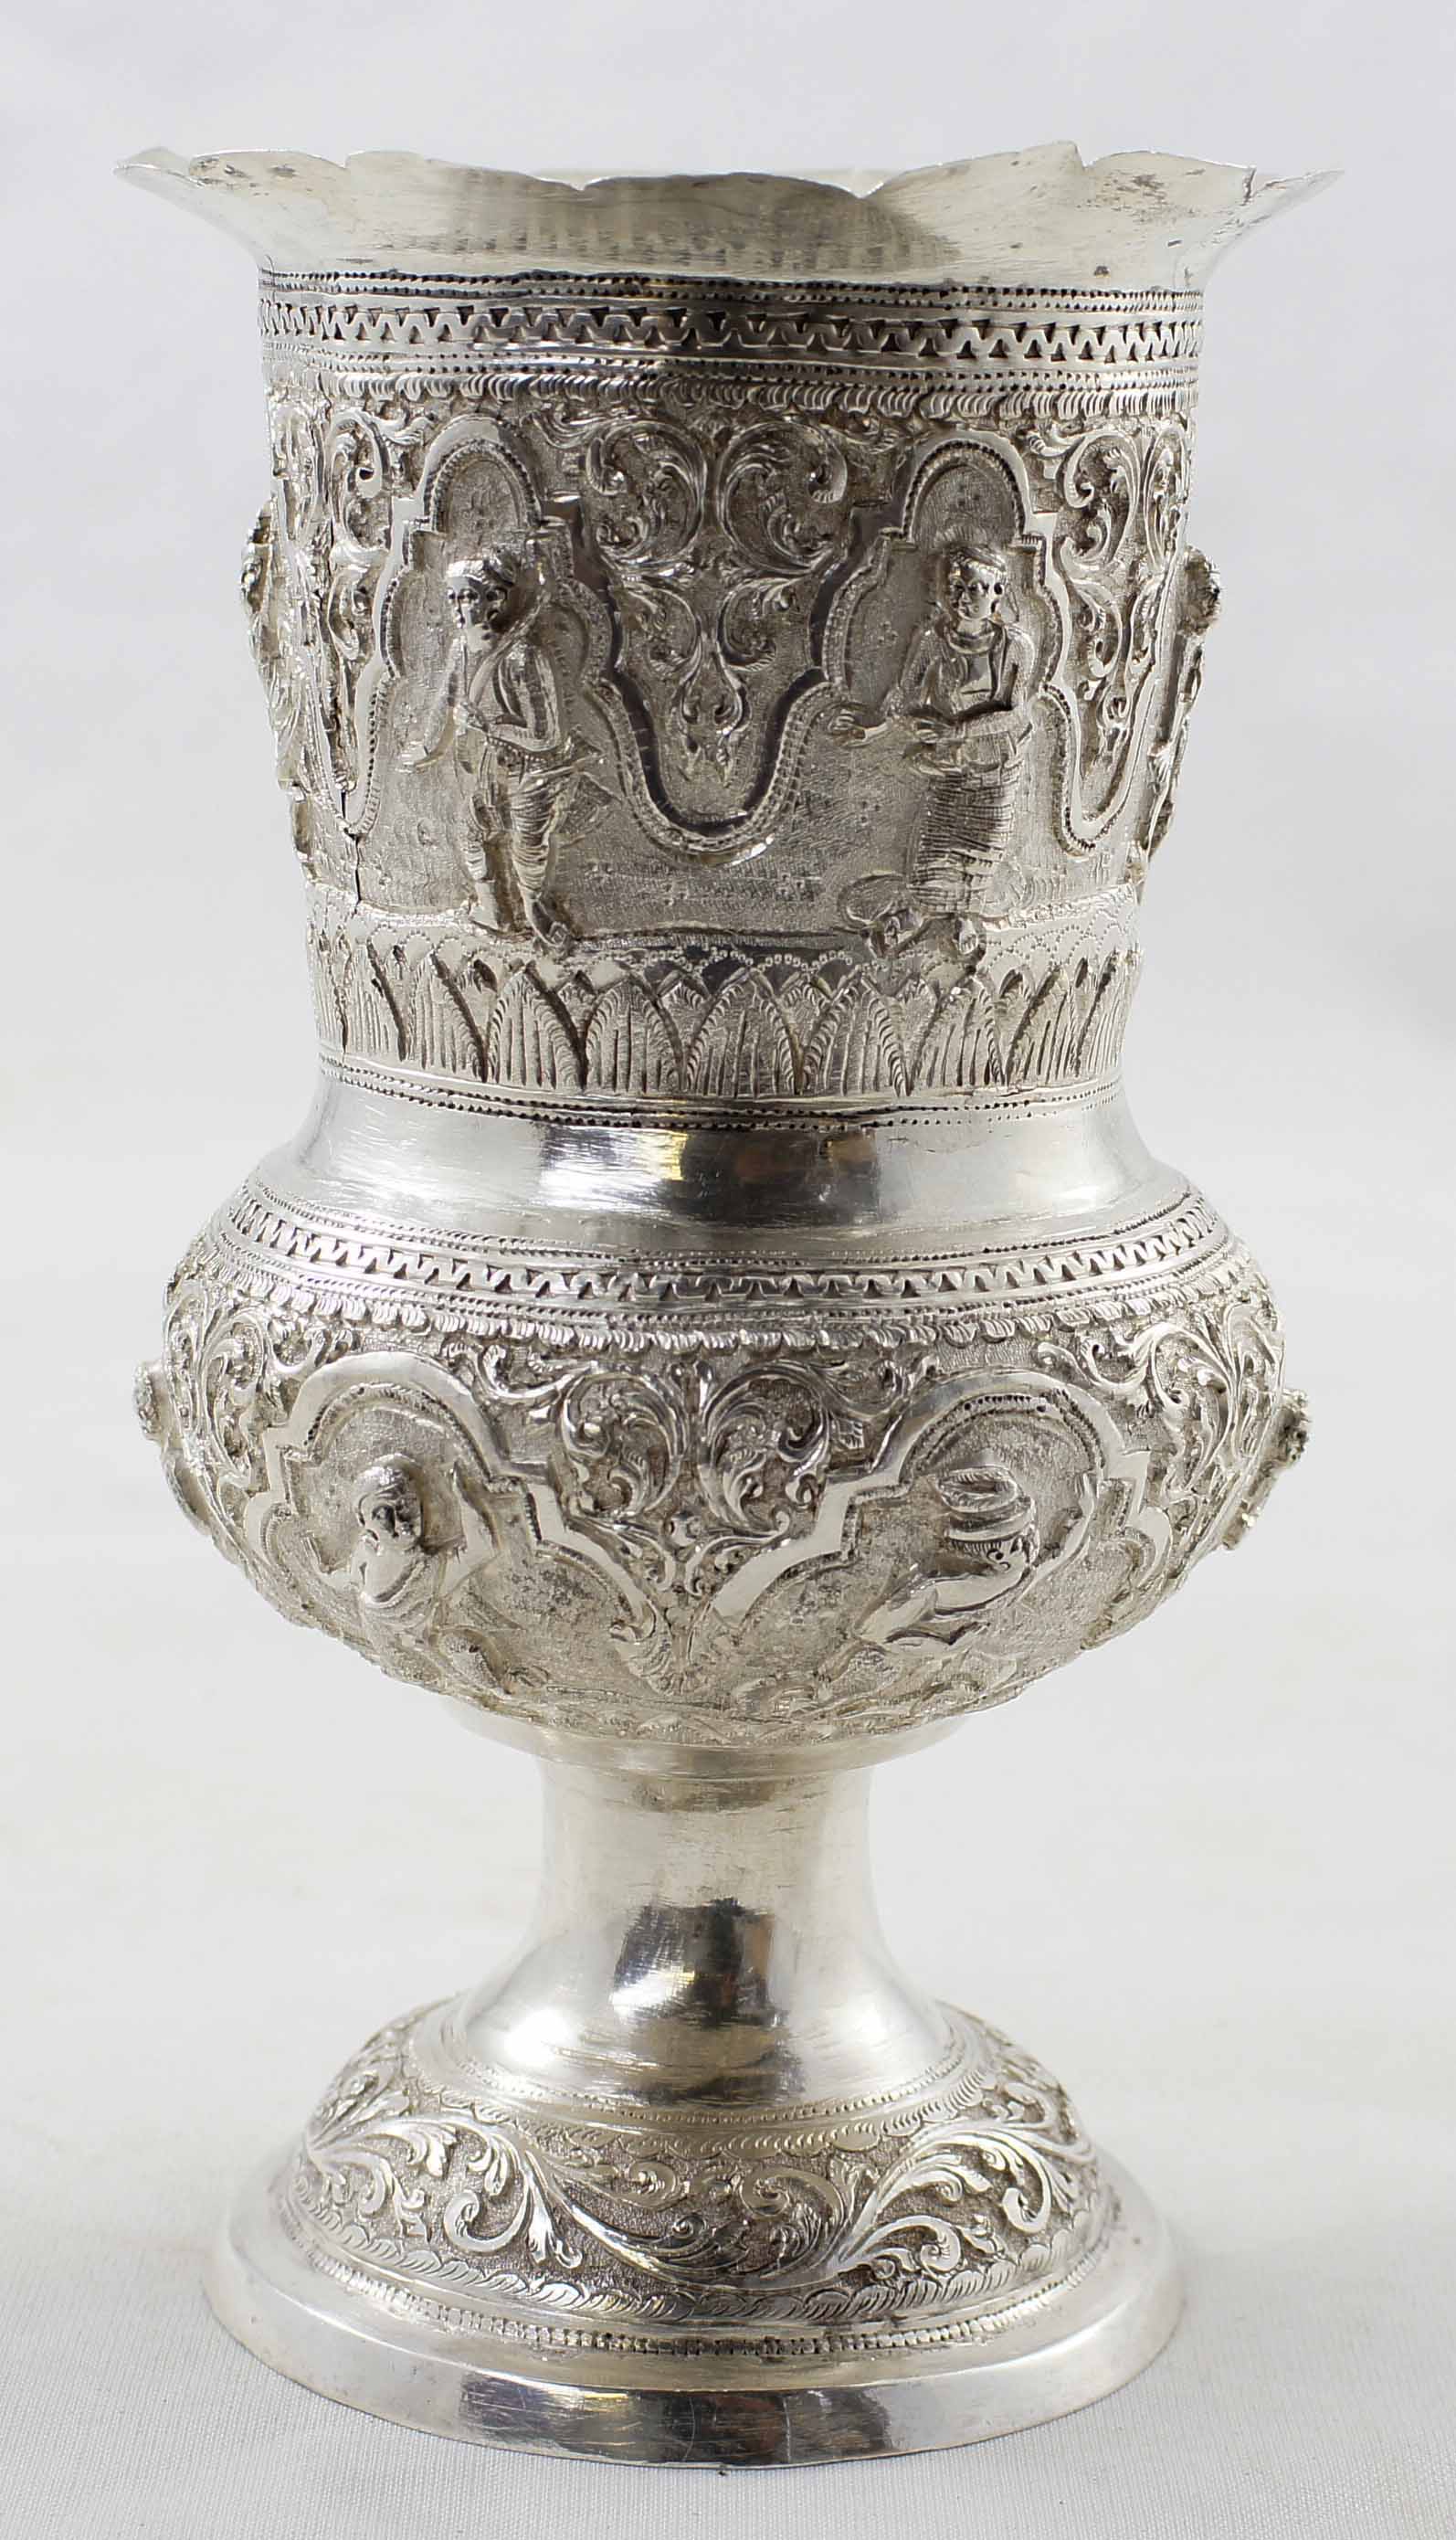 Early Eastern silver goblet with embossed figural deity and warrior relief and foliage scroll